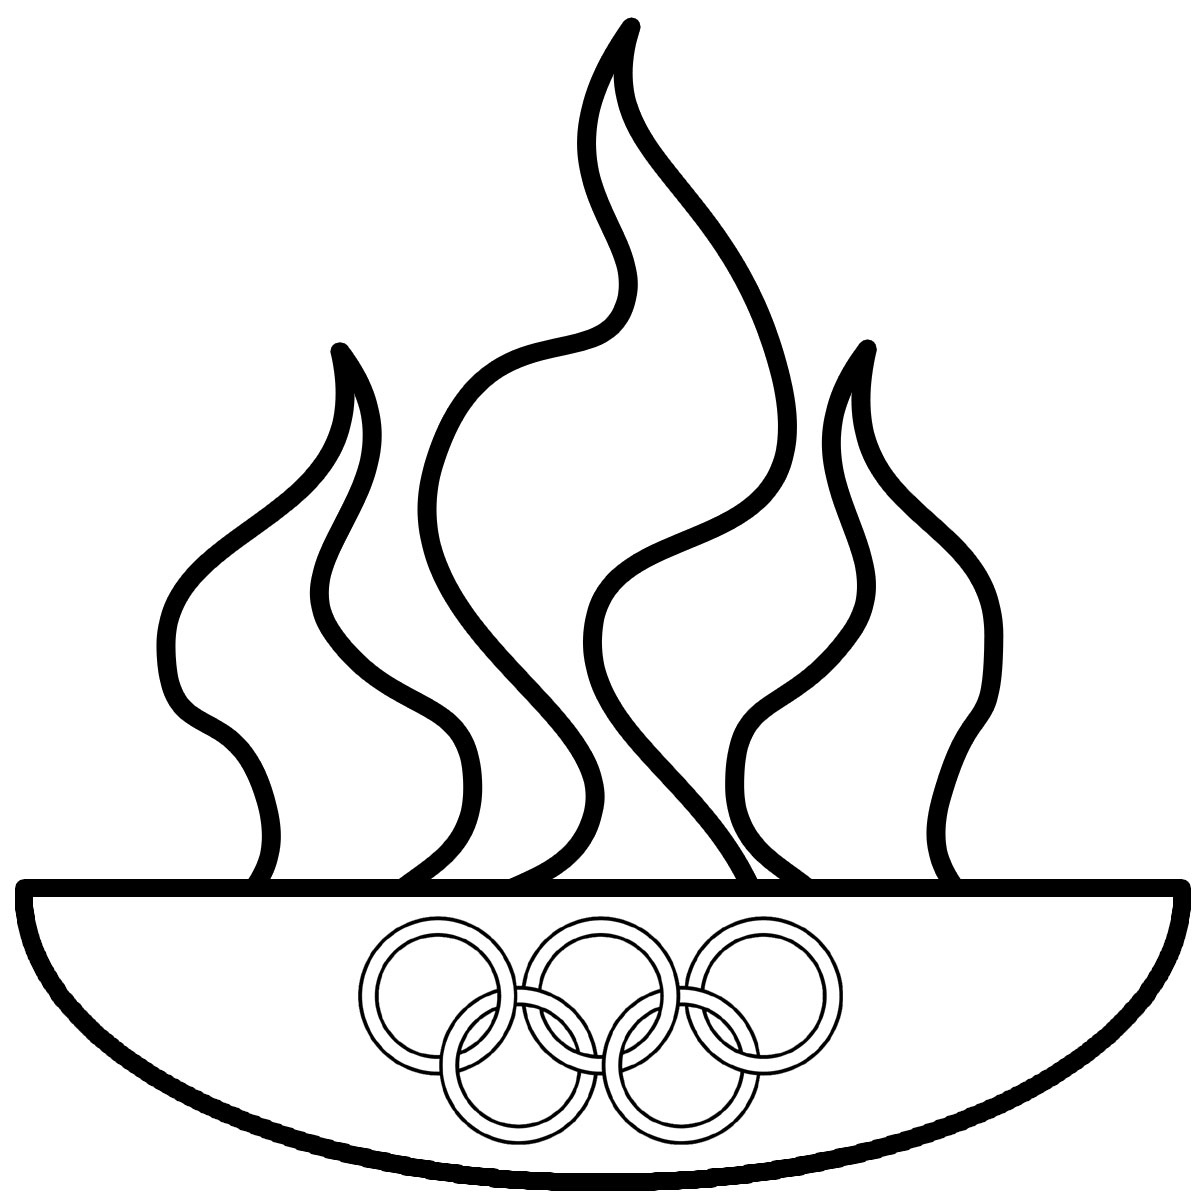 Olympic Torch 2014 Clipart